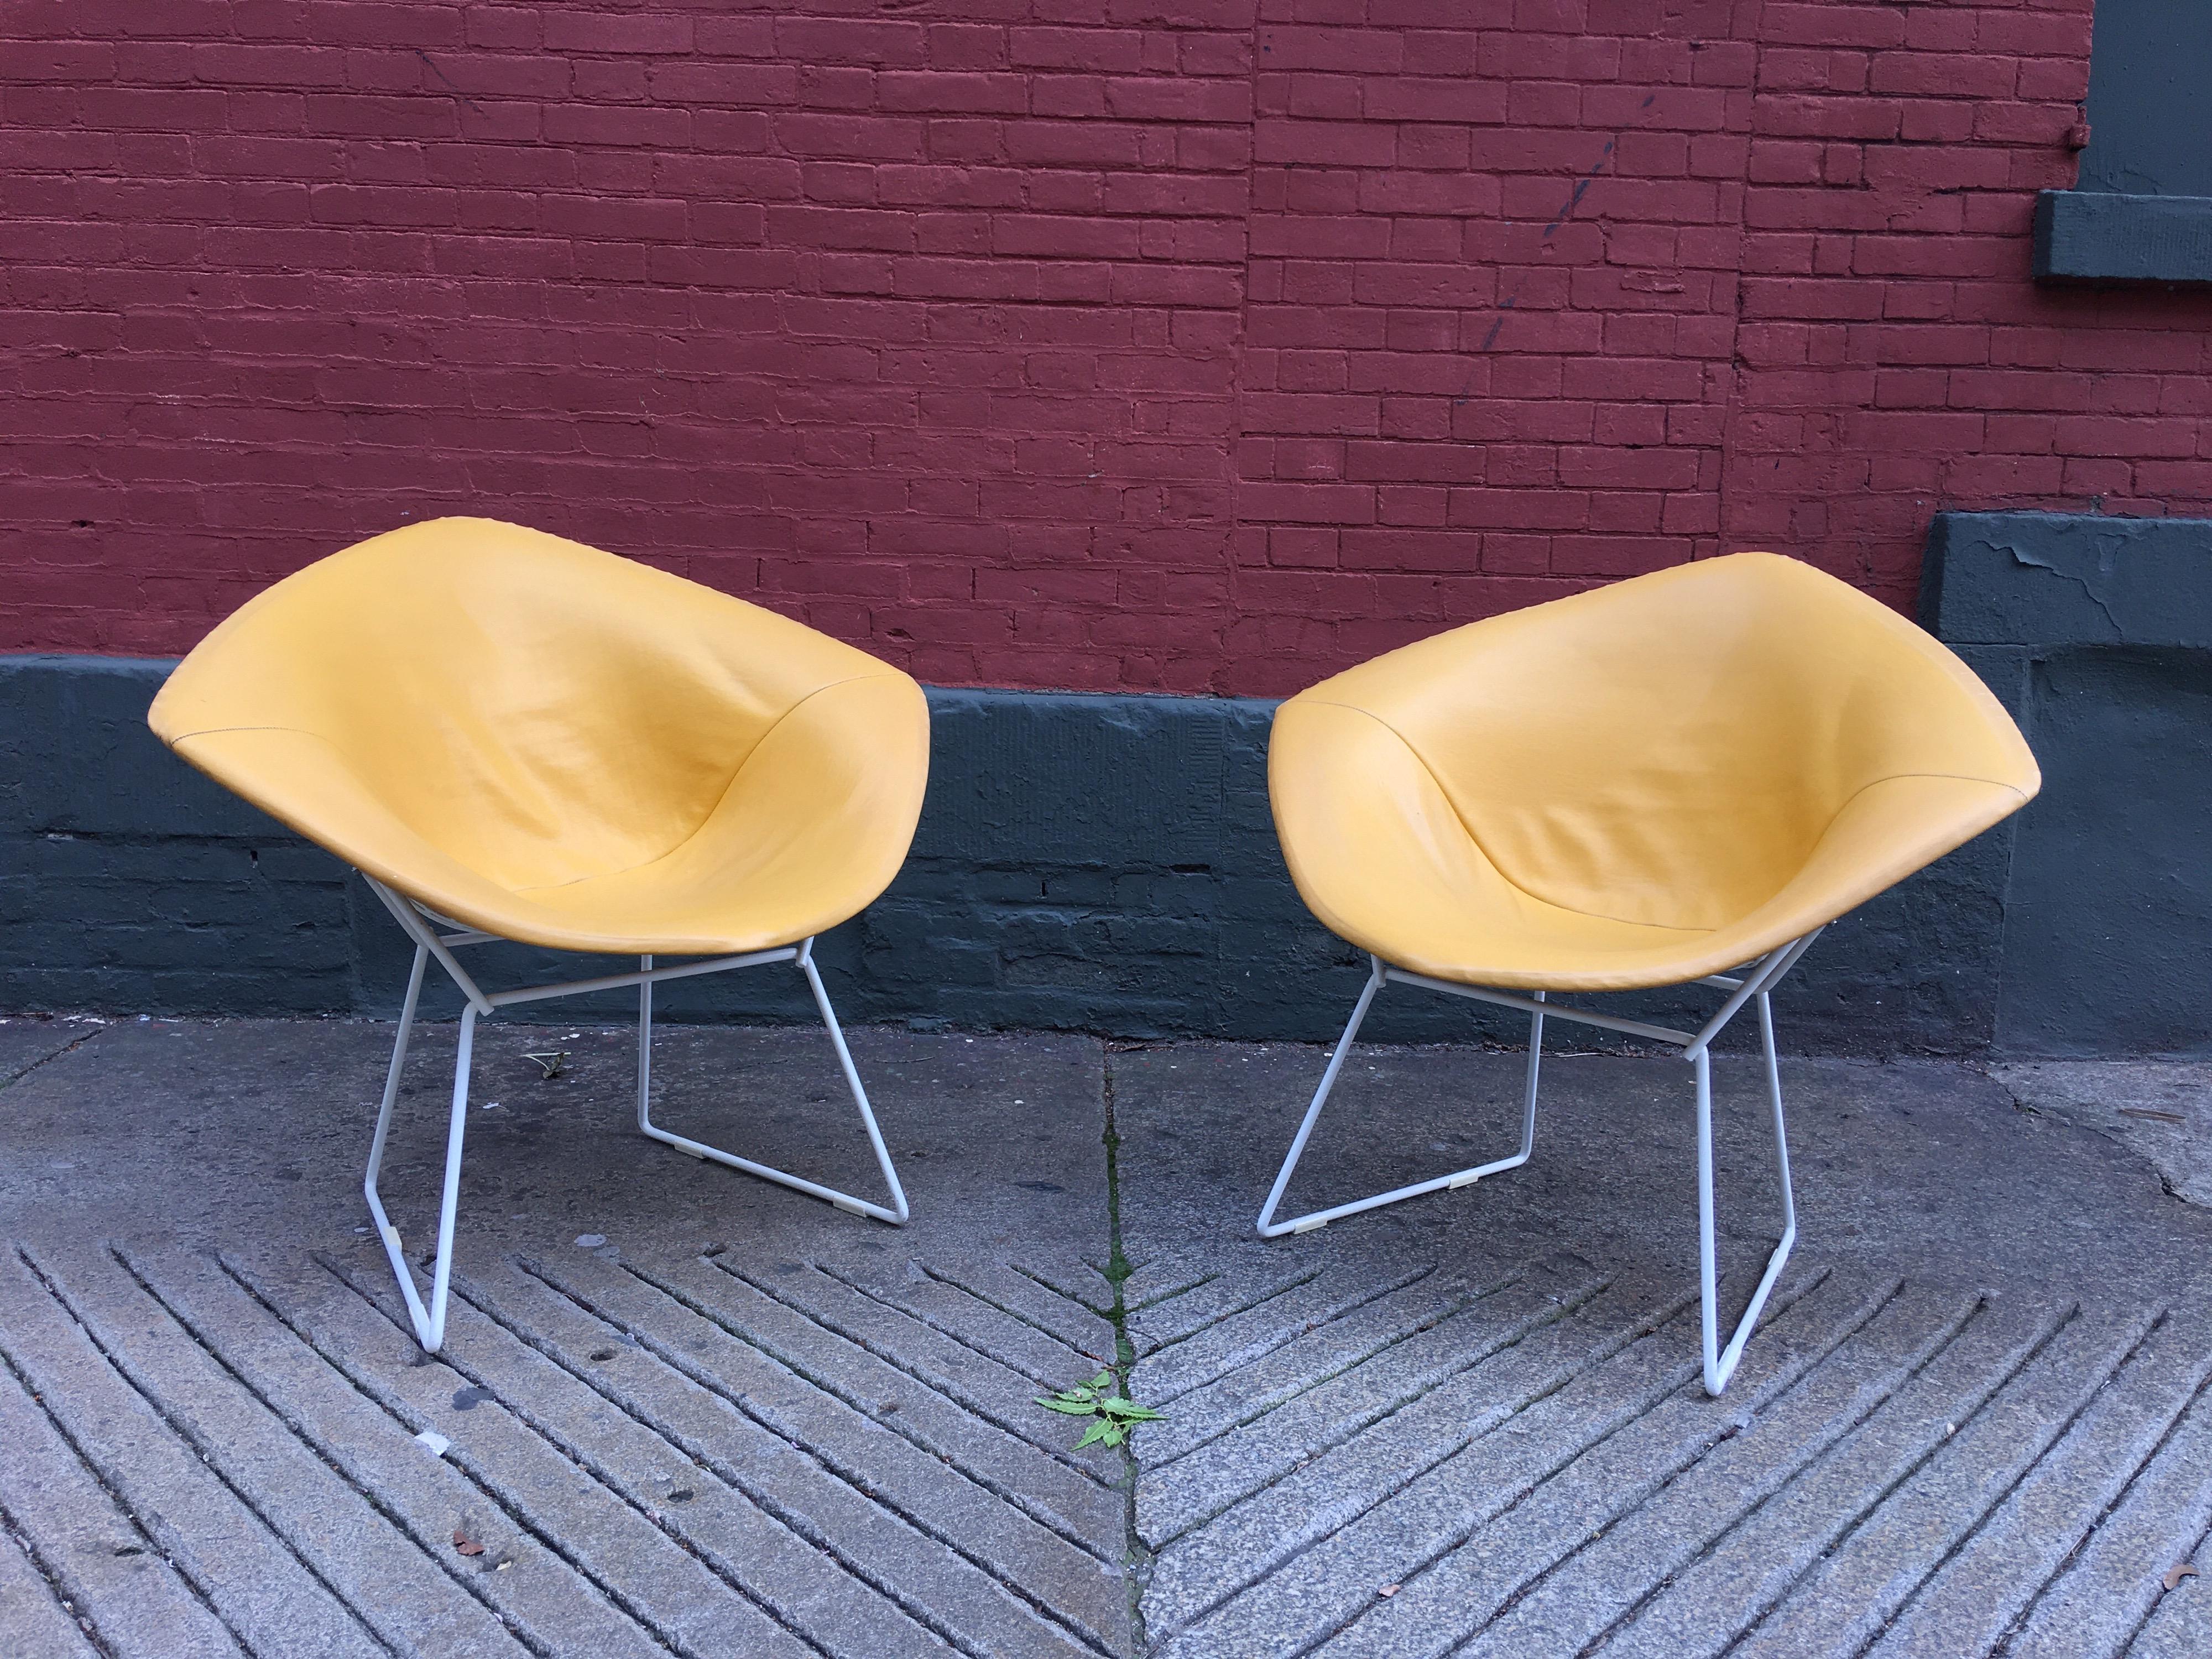 Nice early pair of Harry Bertoia for Knoll diamond chairs. Very early label, these chairs date to the early 1960s mustard colored yellow seat pads in very nice condition! White frames are near perfect! Always inside these chairs are very clean. One